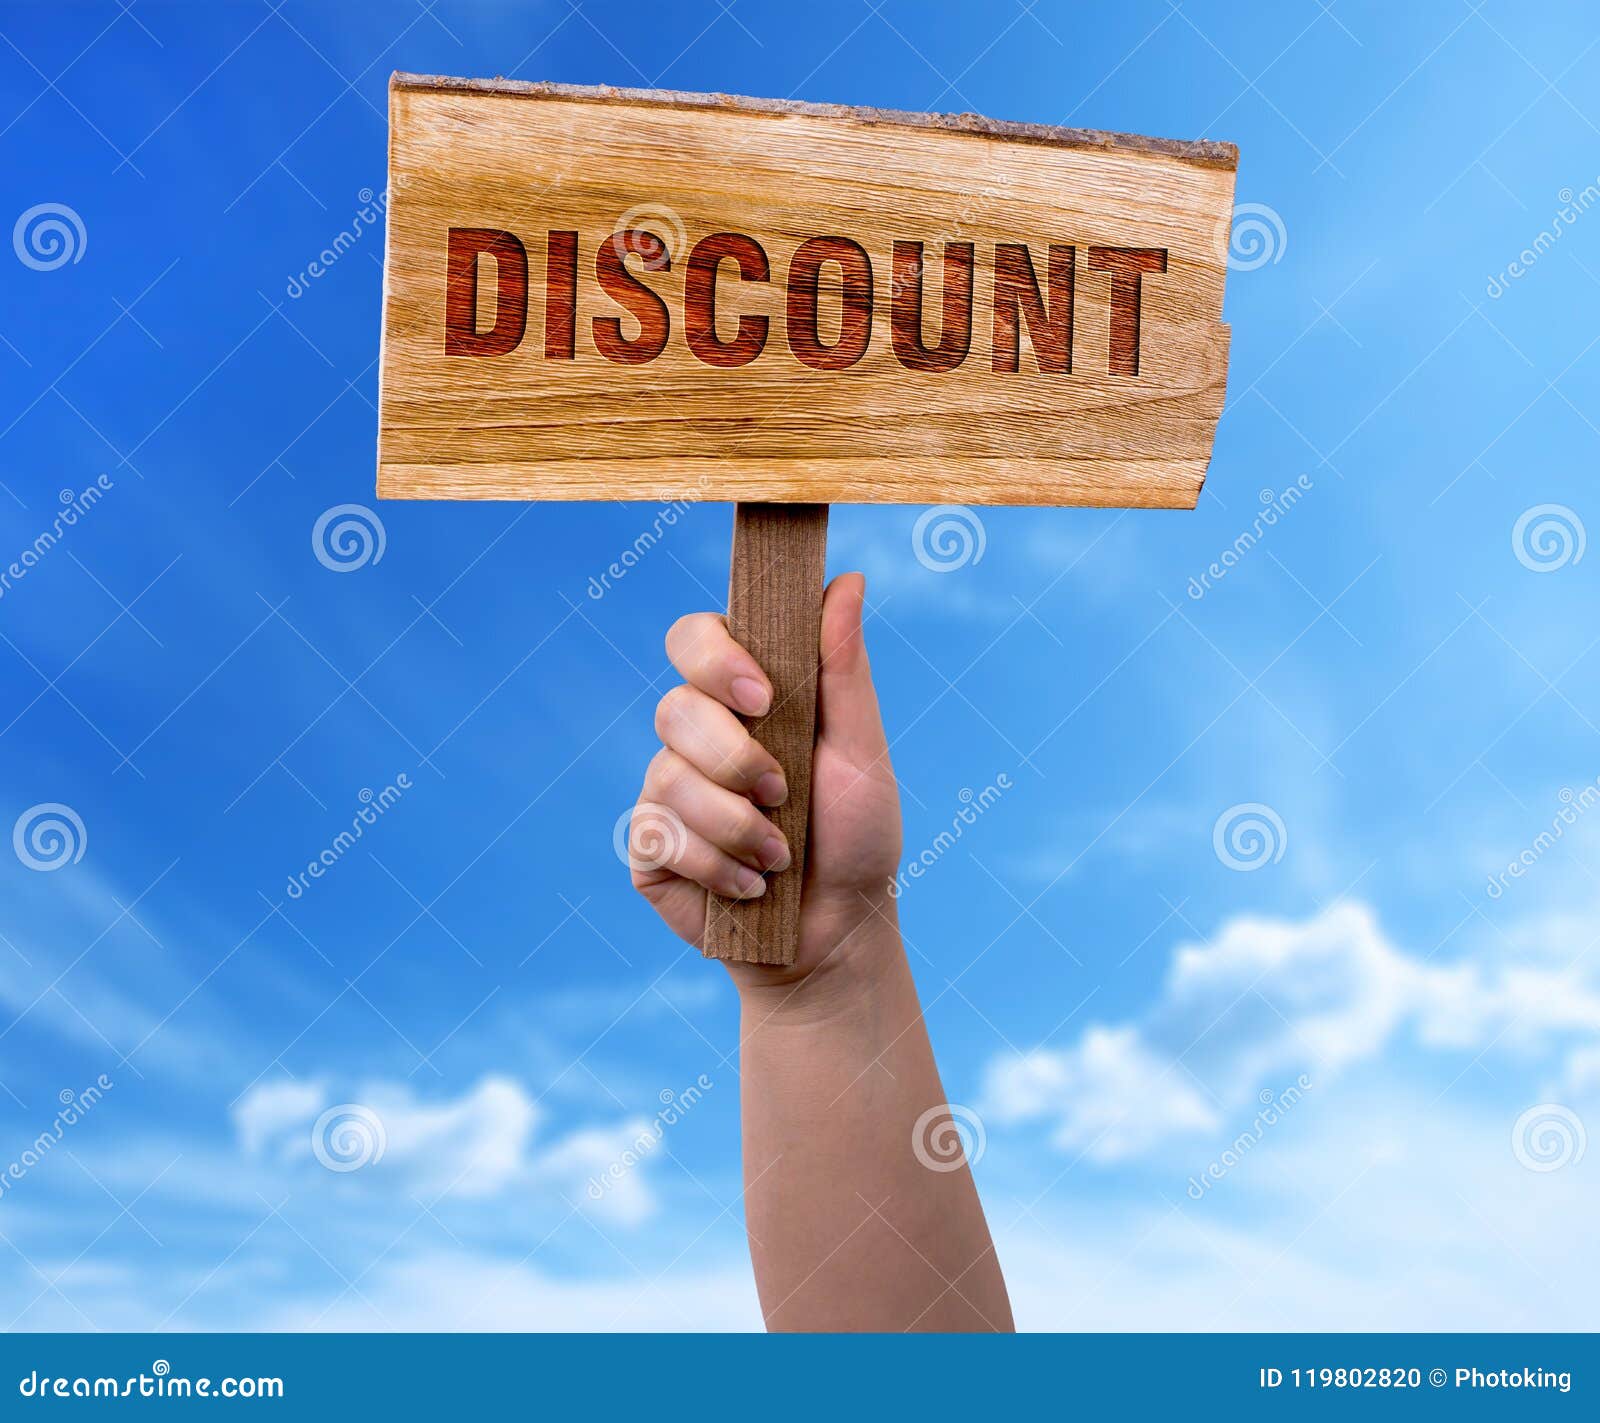 discount wooden sign